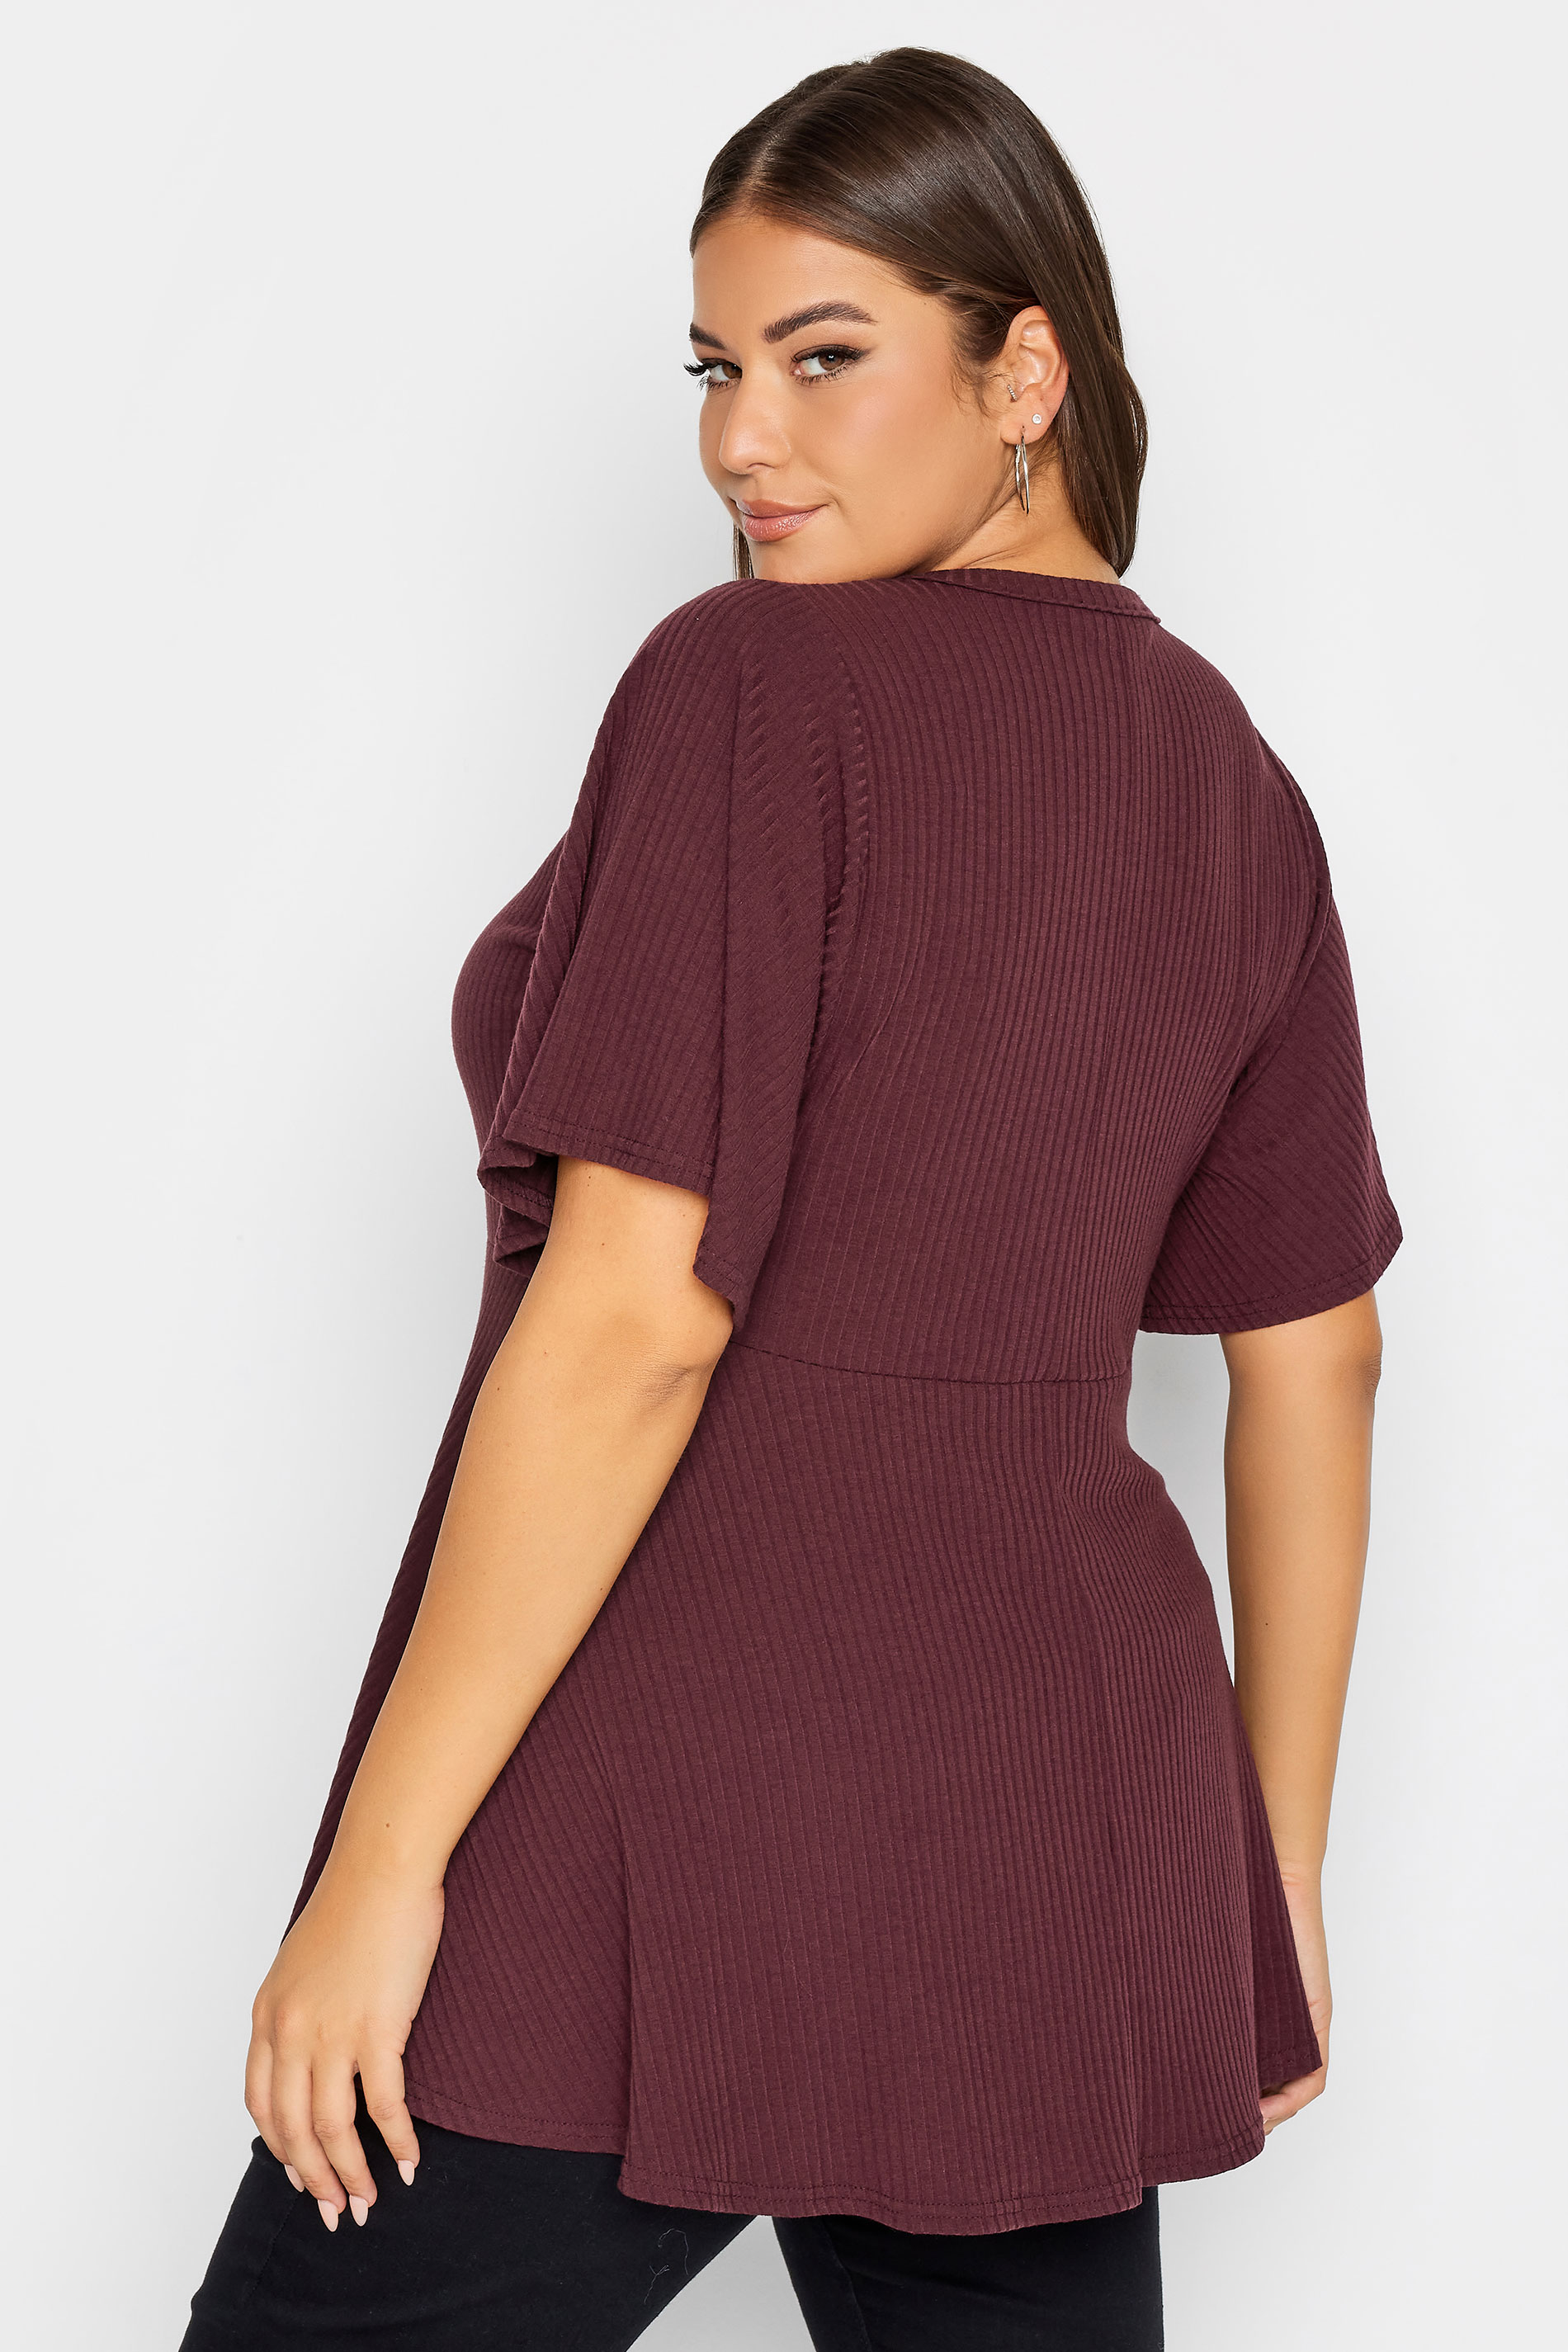 YOURS Plus Size Burgundy Red Keyhole Peplum Top | Yours Clothing 3